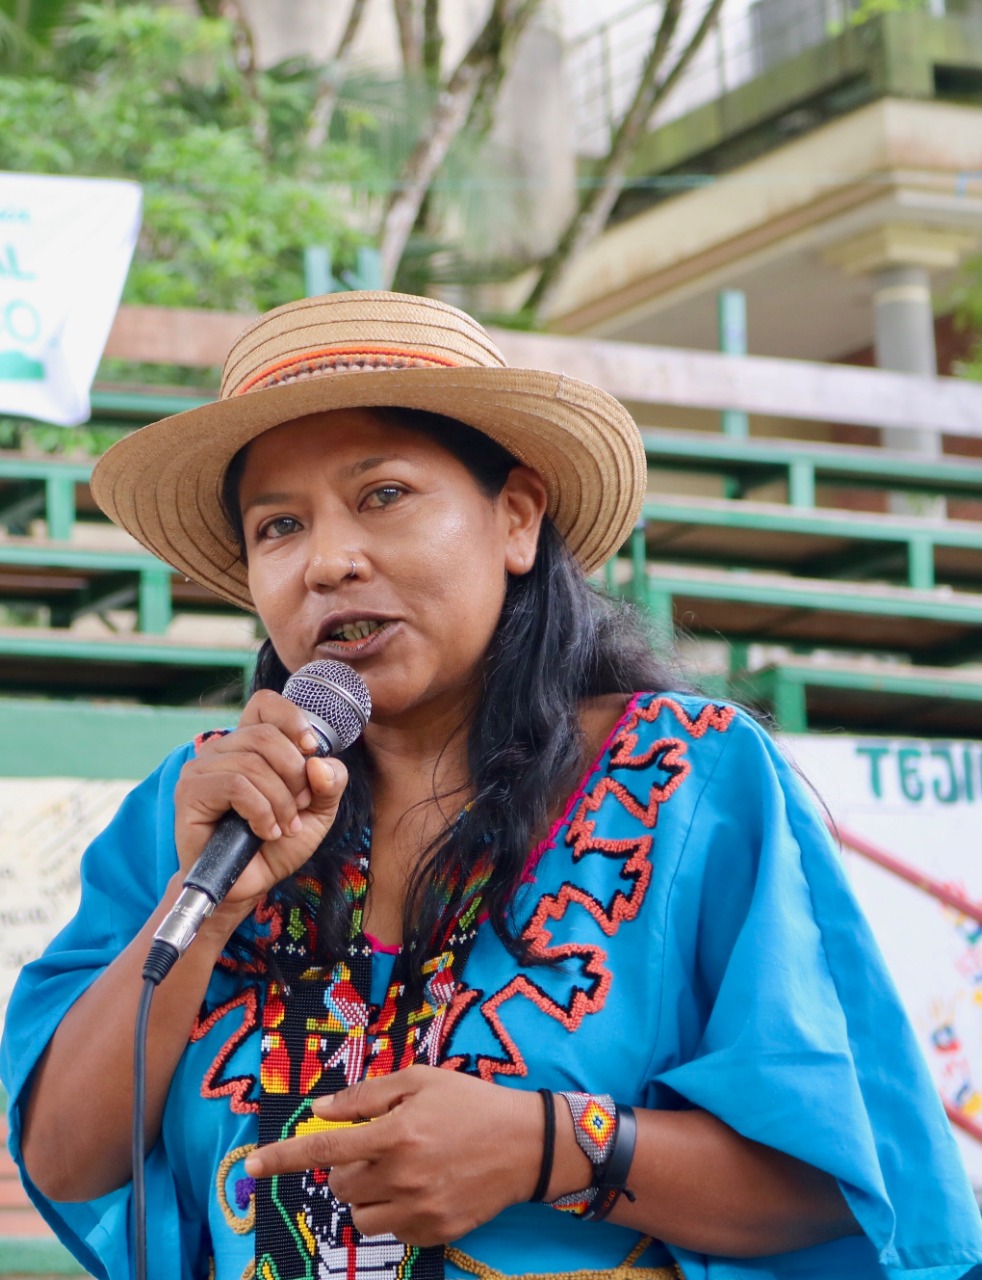 Luz Mery Panche, an indigenous leader of the Nasa people of Colombia. : Courtesy of Luz Mery Panche